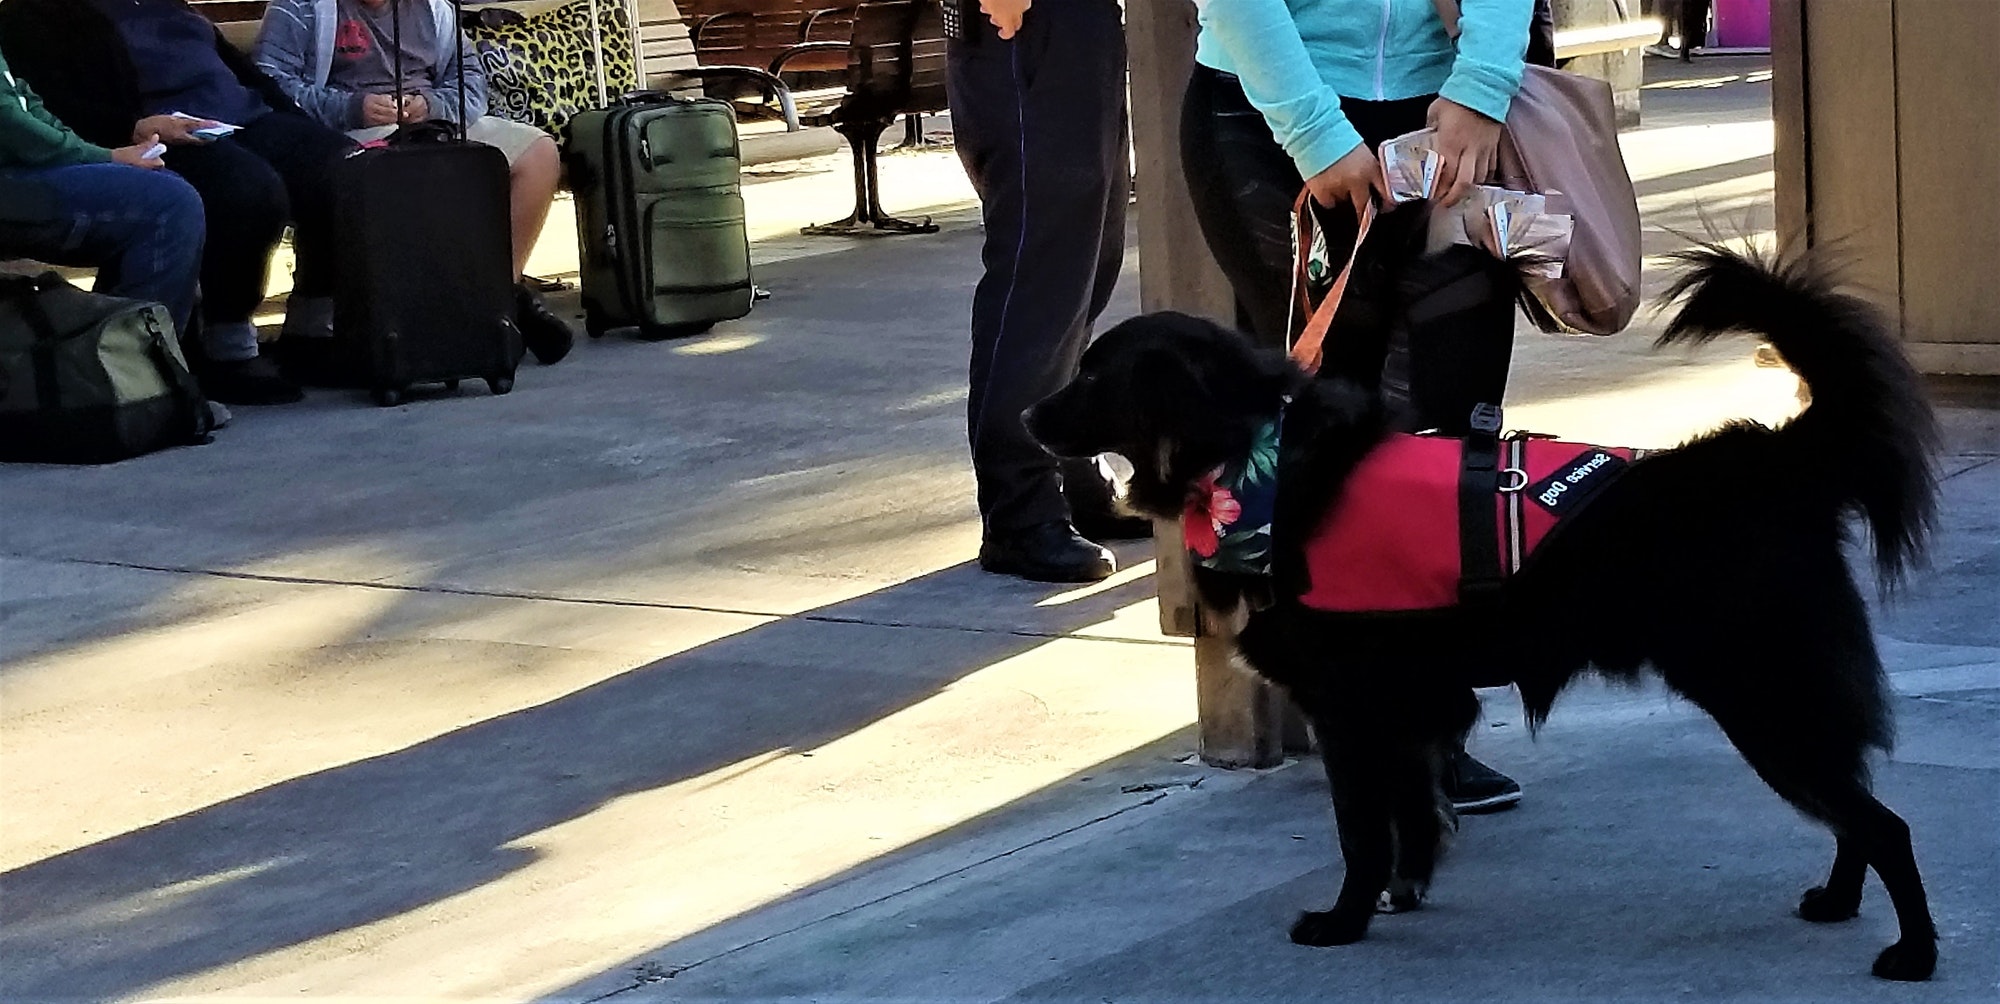 Service Dog Ready to Board the Airplane